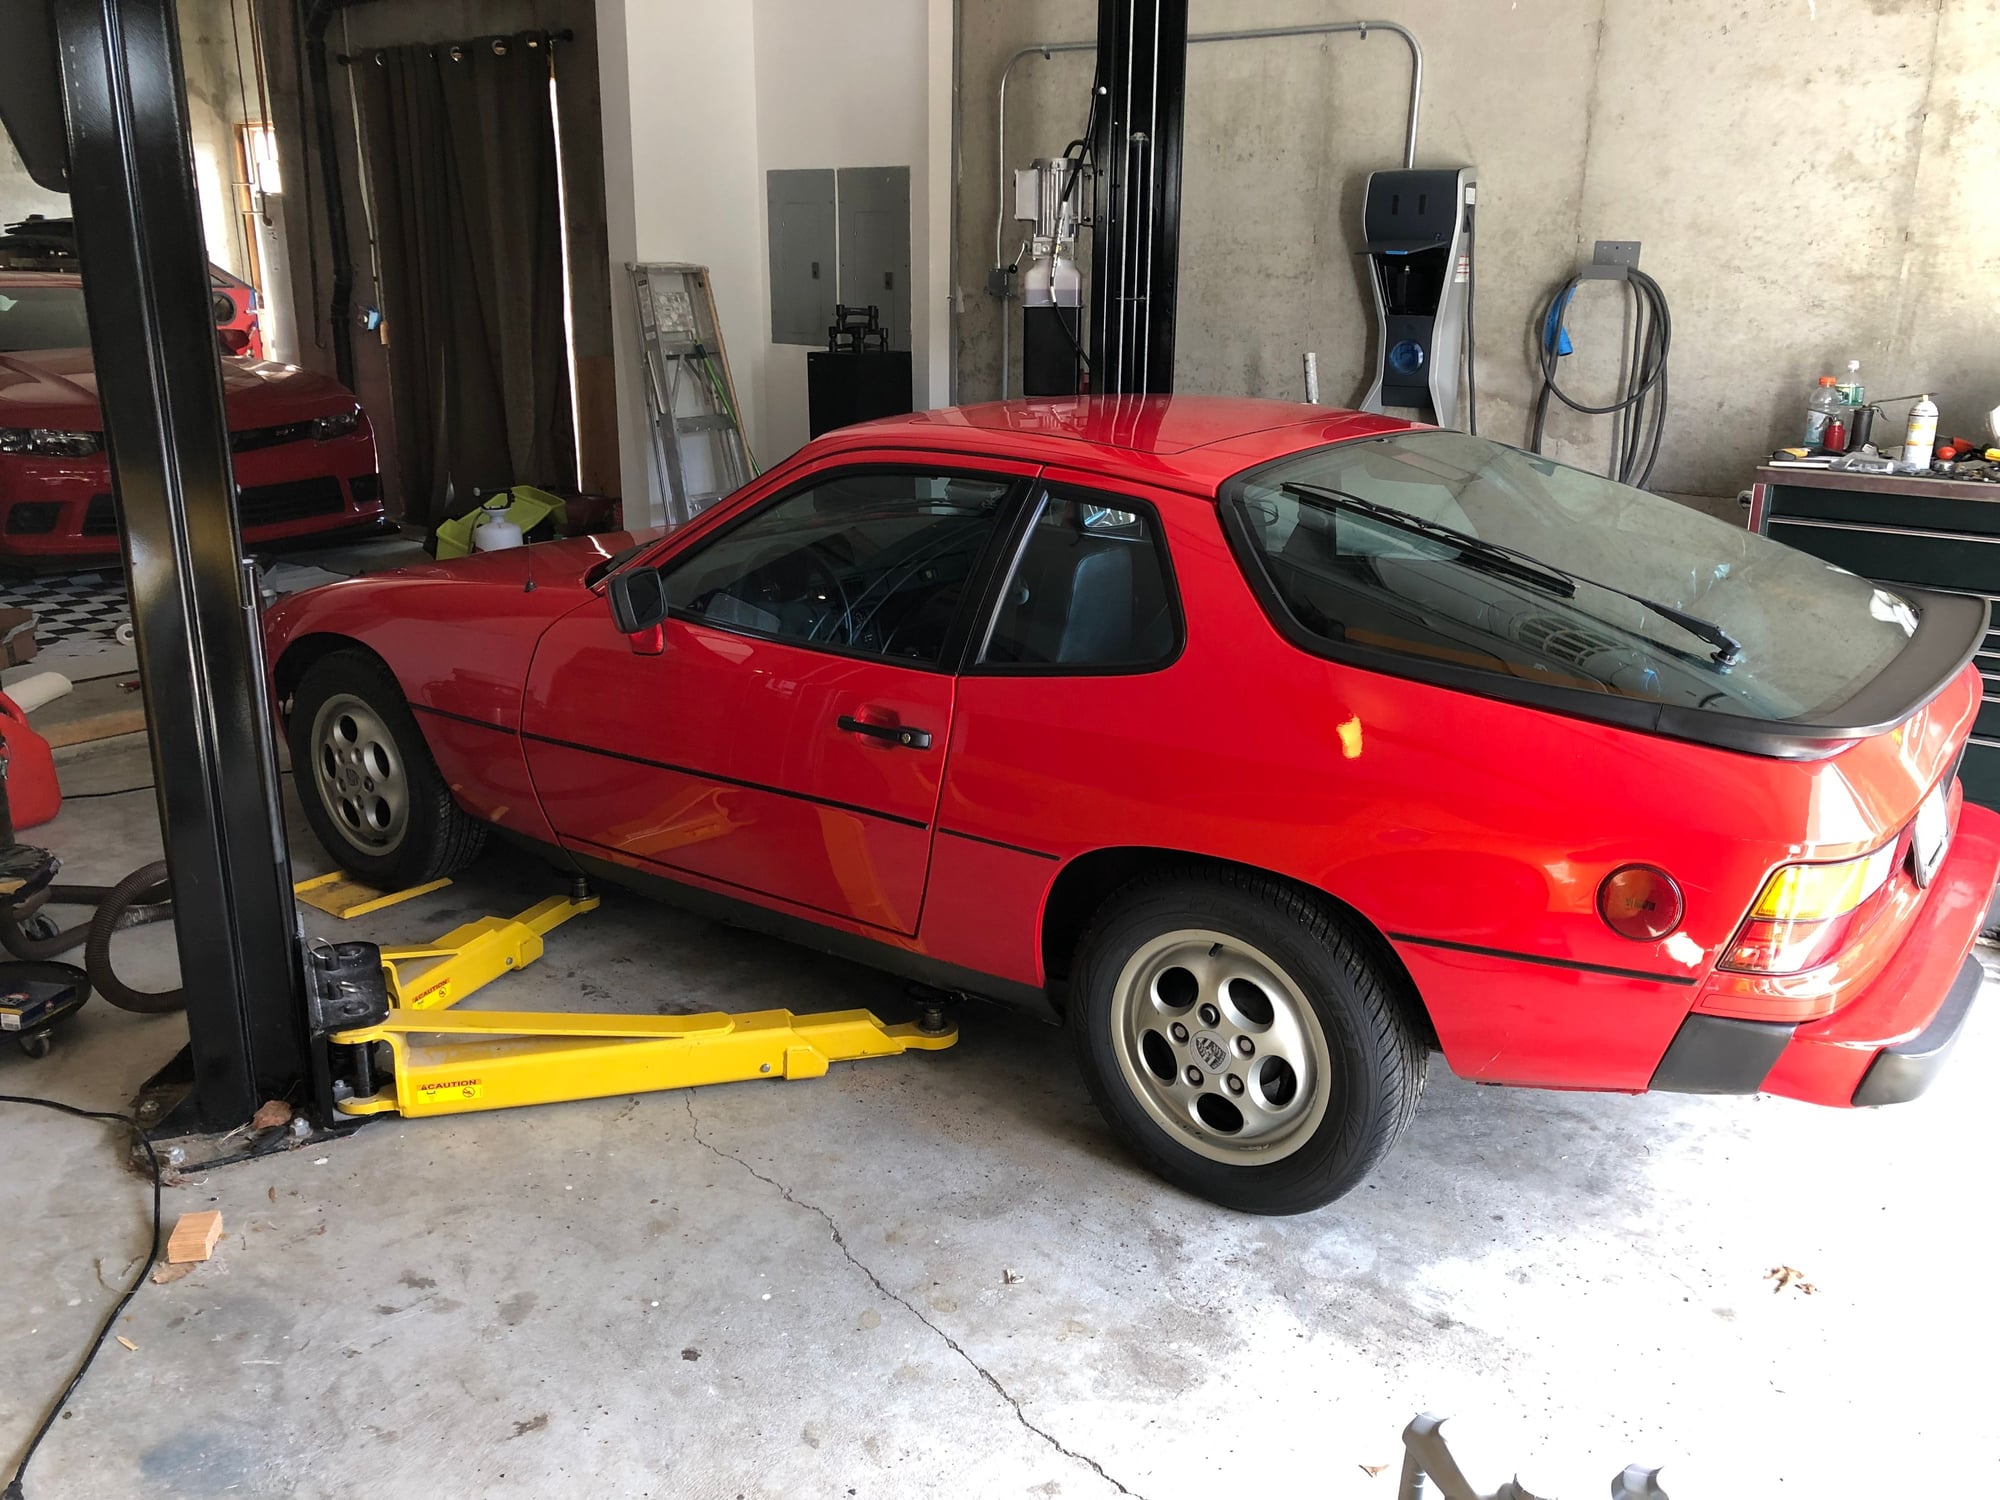 1987 Porsche 924 - 1987 Porsche 924s. Original owner. PCA member. A true original unmolested example. - Used - VIN wp0aa0926hn453477 - 118,454 Miles - 4 cyl - 2WD - Manual - Coupe - Red - Tomkins Cove, NY 10986, United States